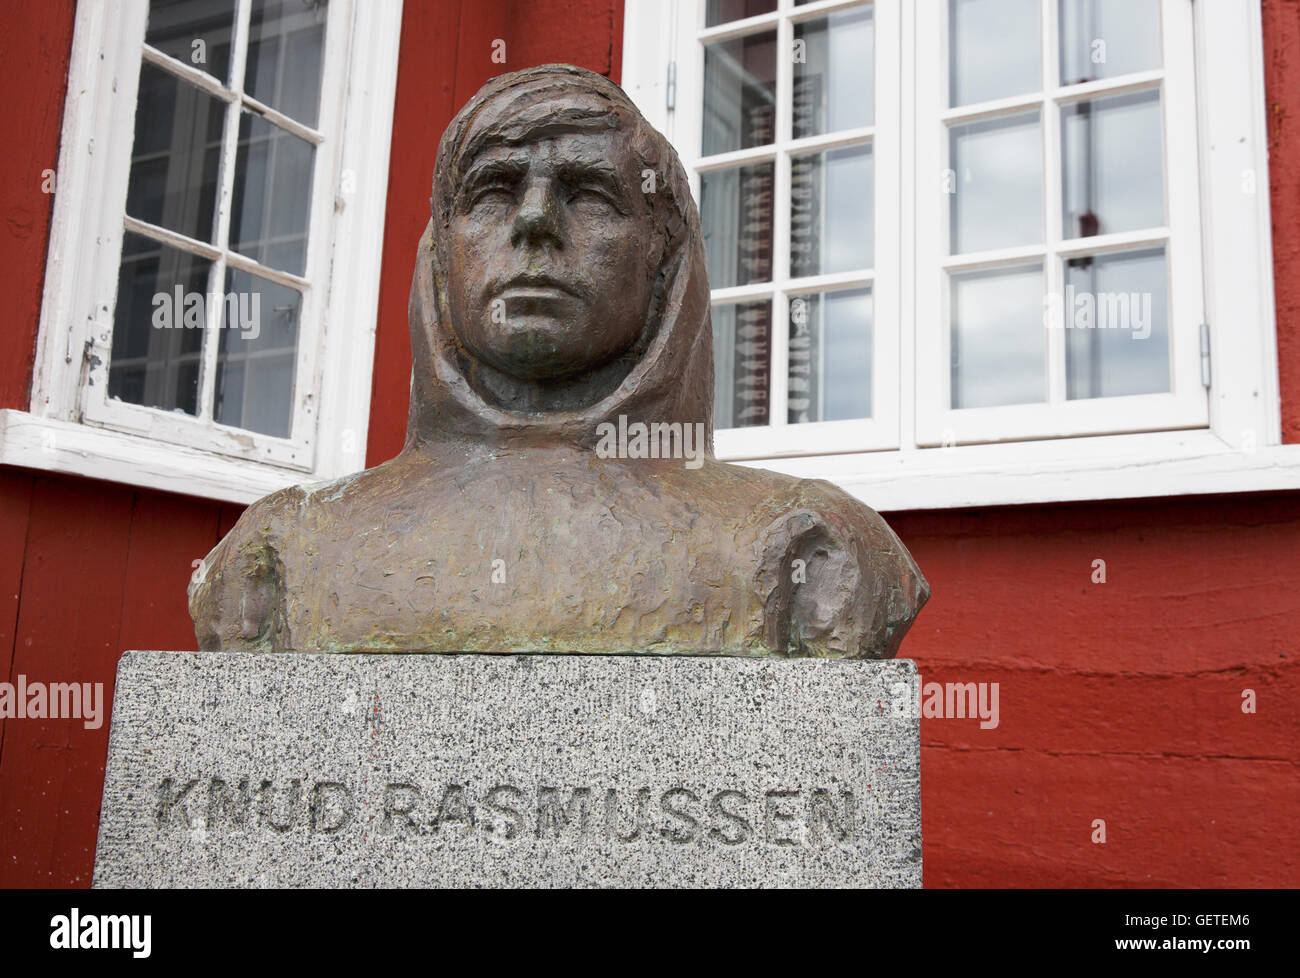 A bust of Knud Rasmussen outside the museum Ilulissat, Greenland Stock Photo